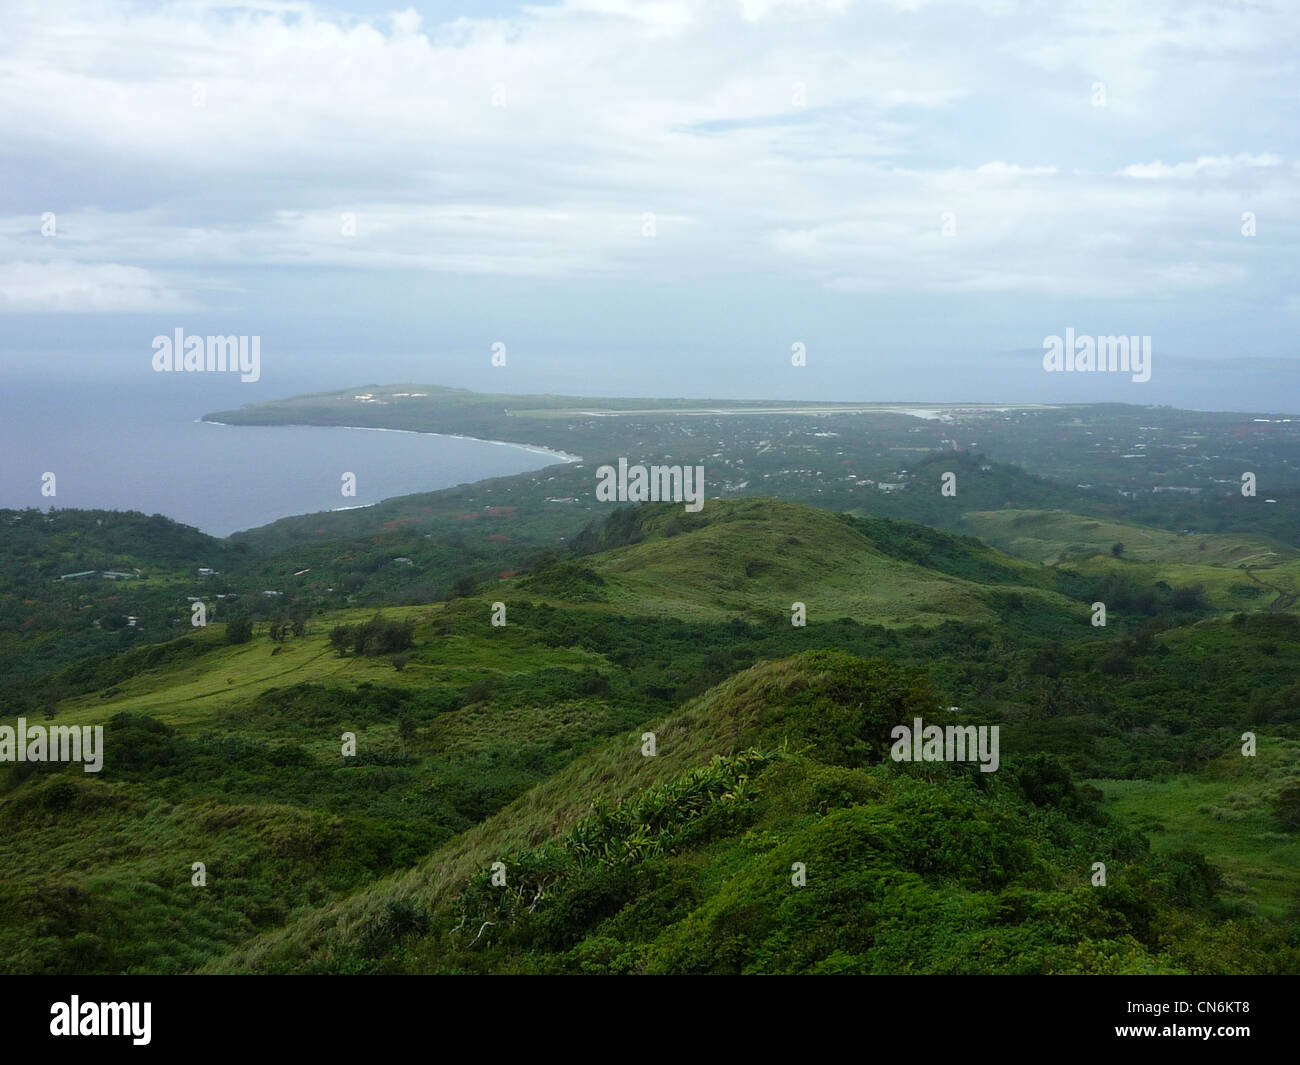 Saipan International Airport from the top of Mt Tapochau. Stock Photo